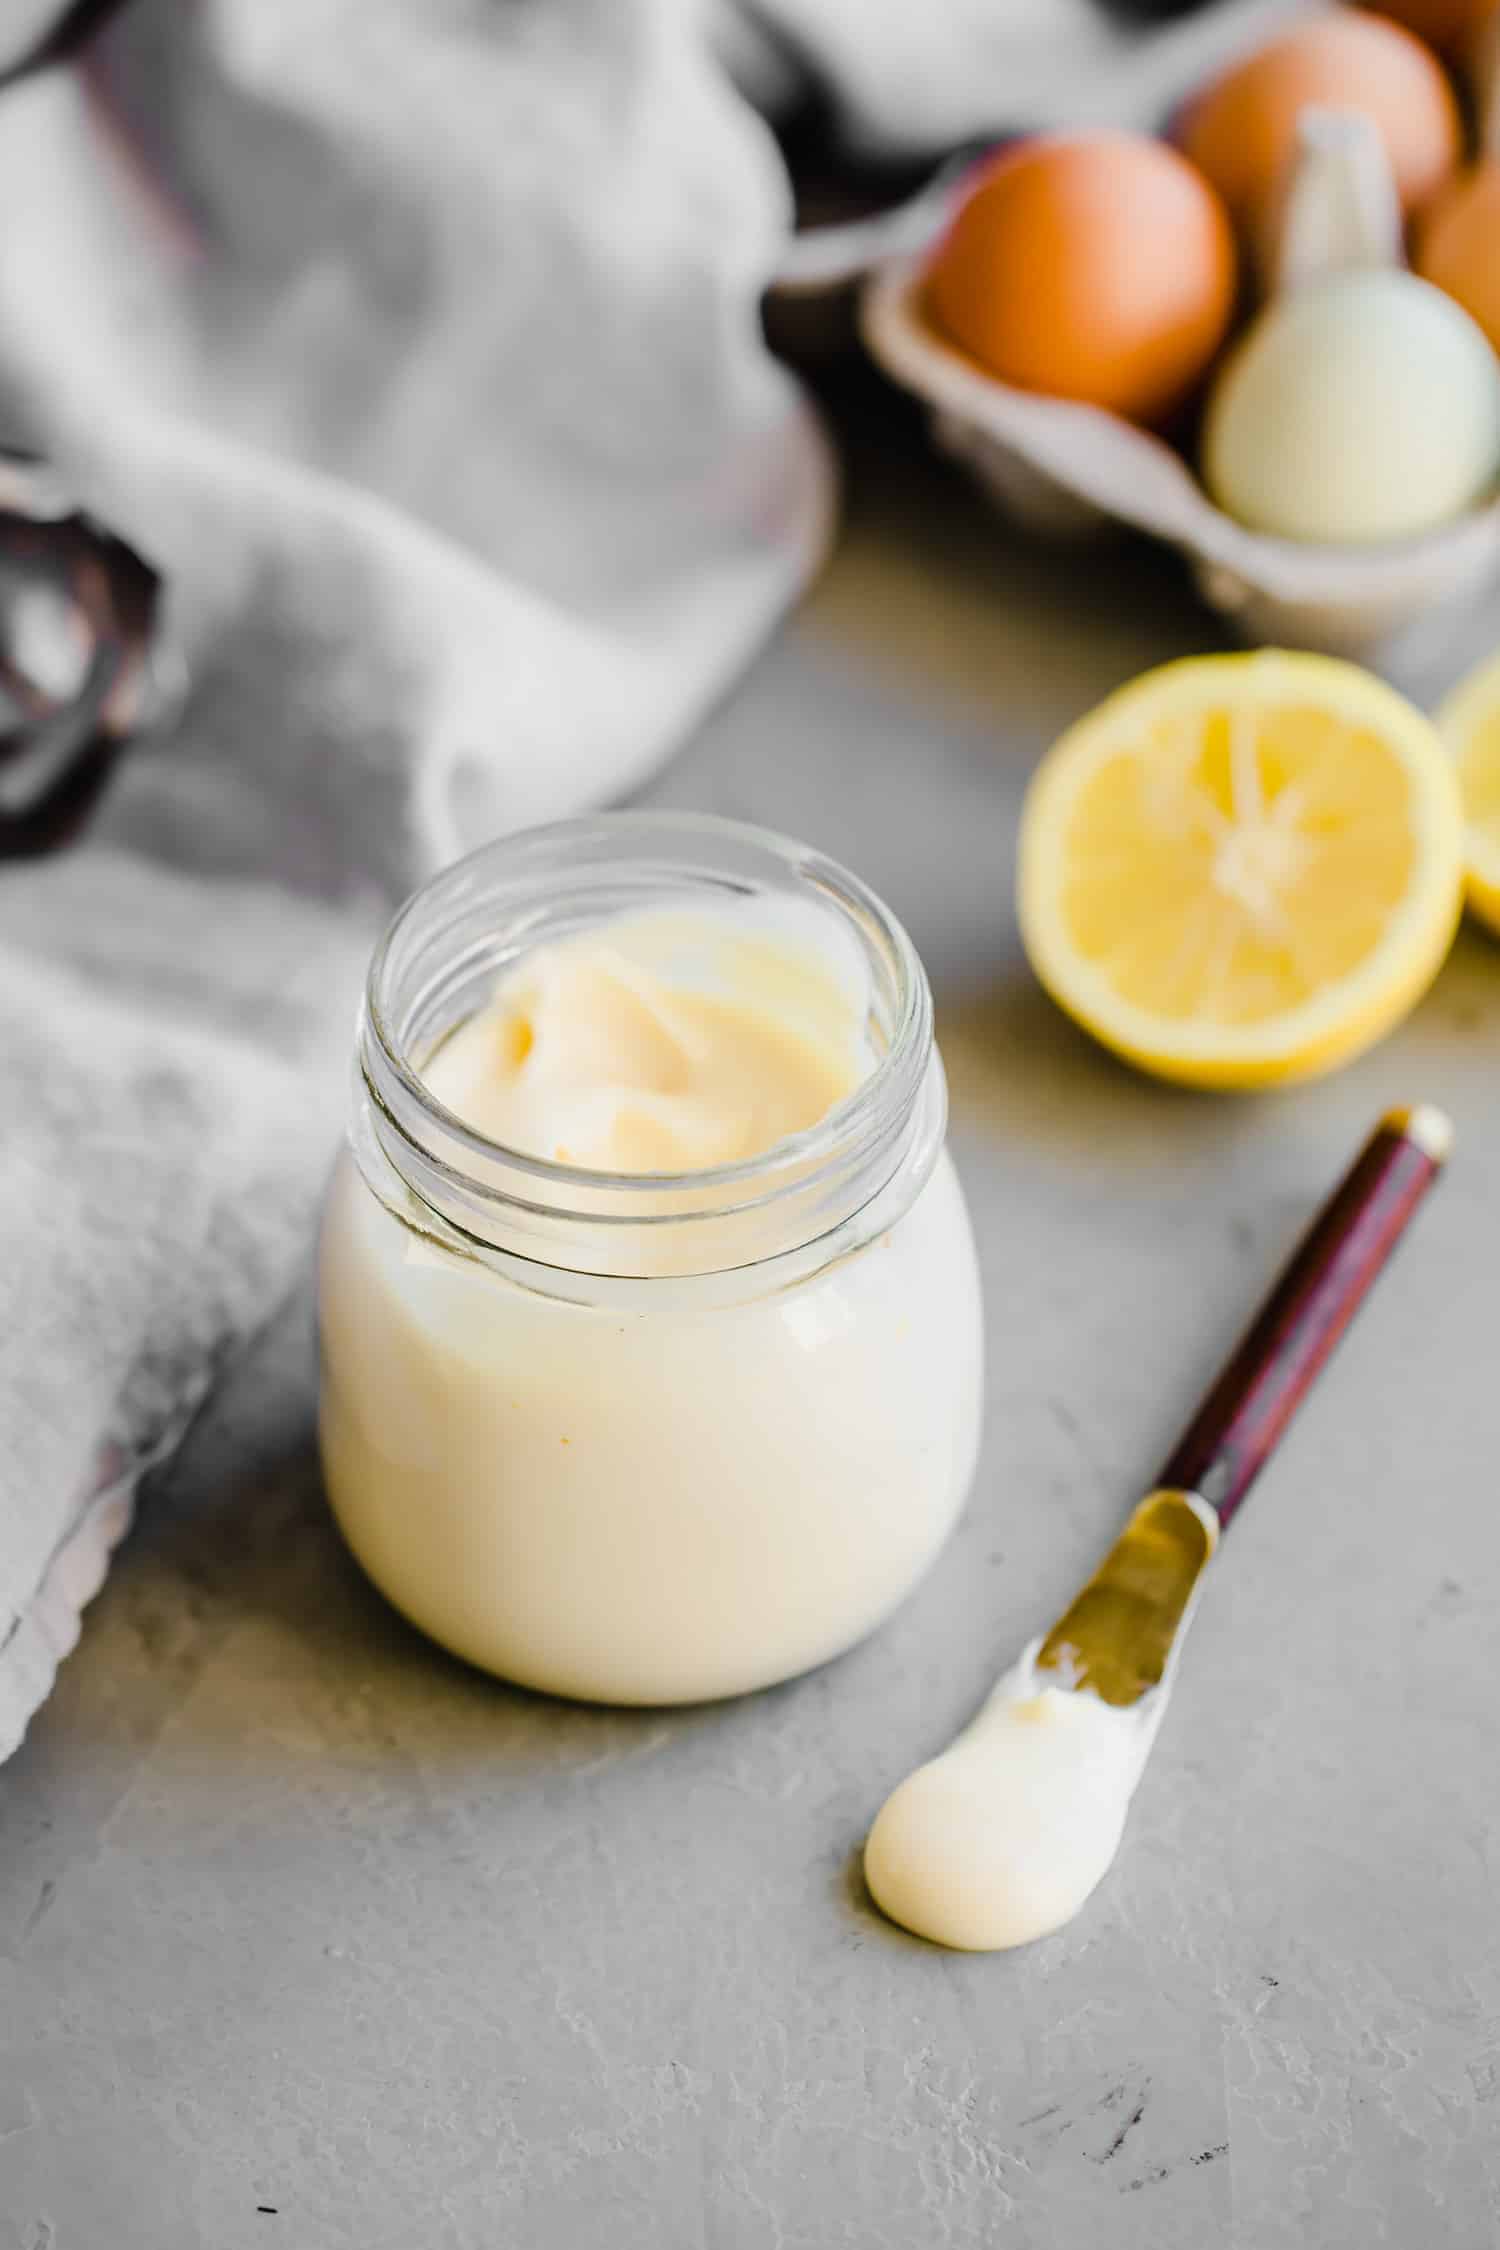 a jar of paleo mayo with a lemon on the side and a spoonful next to it